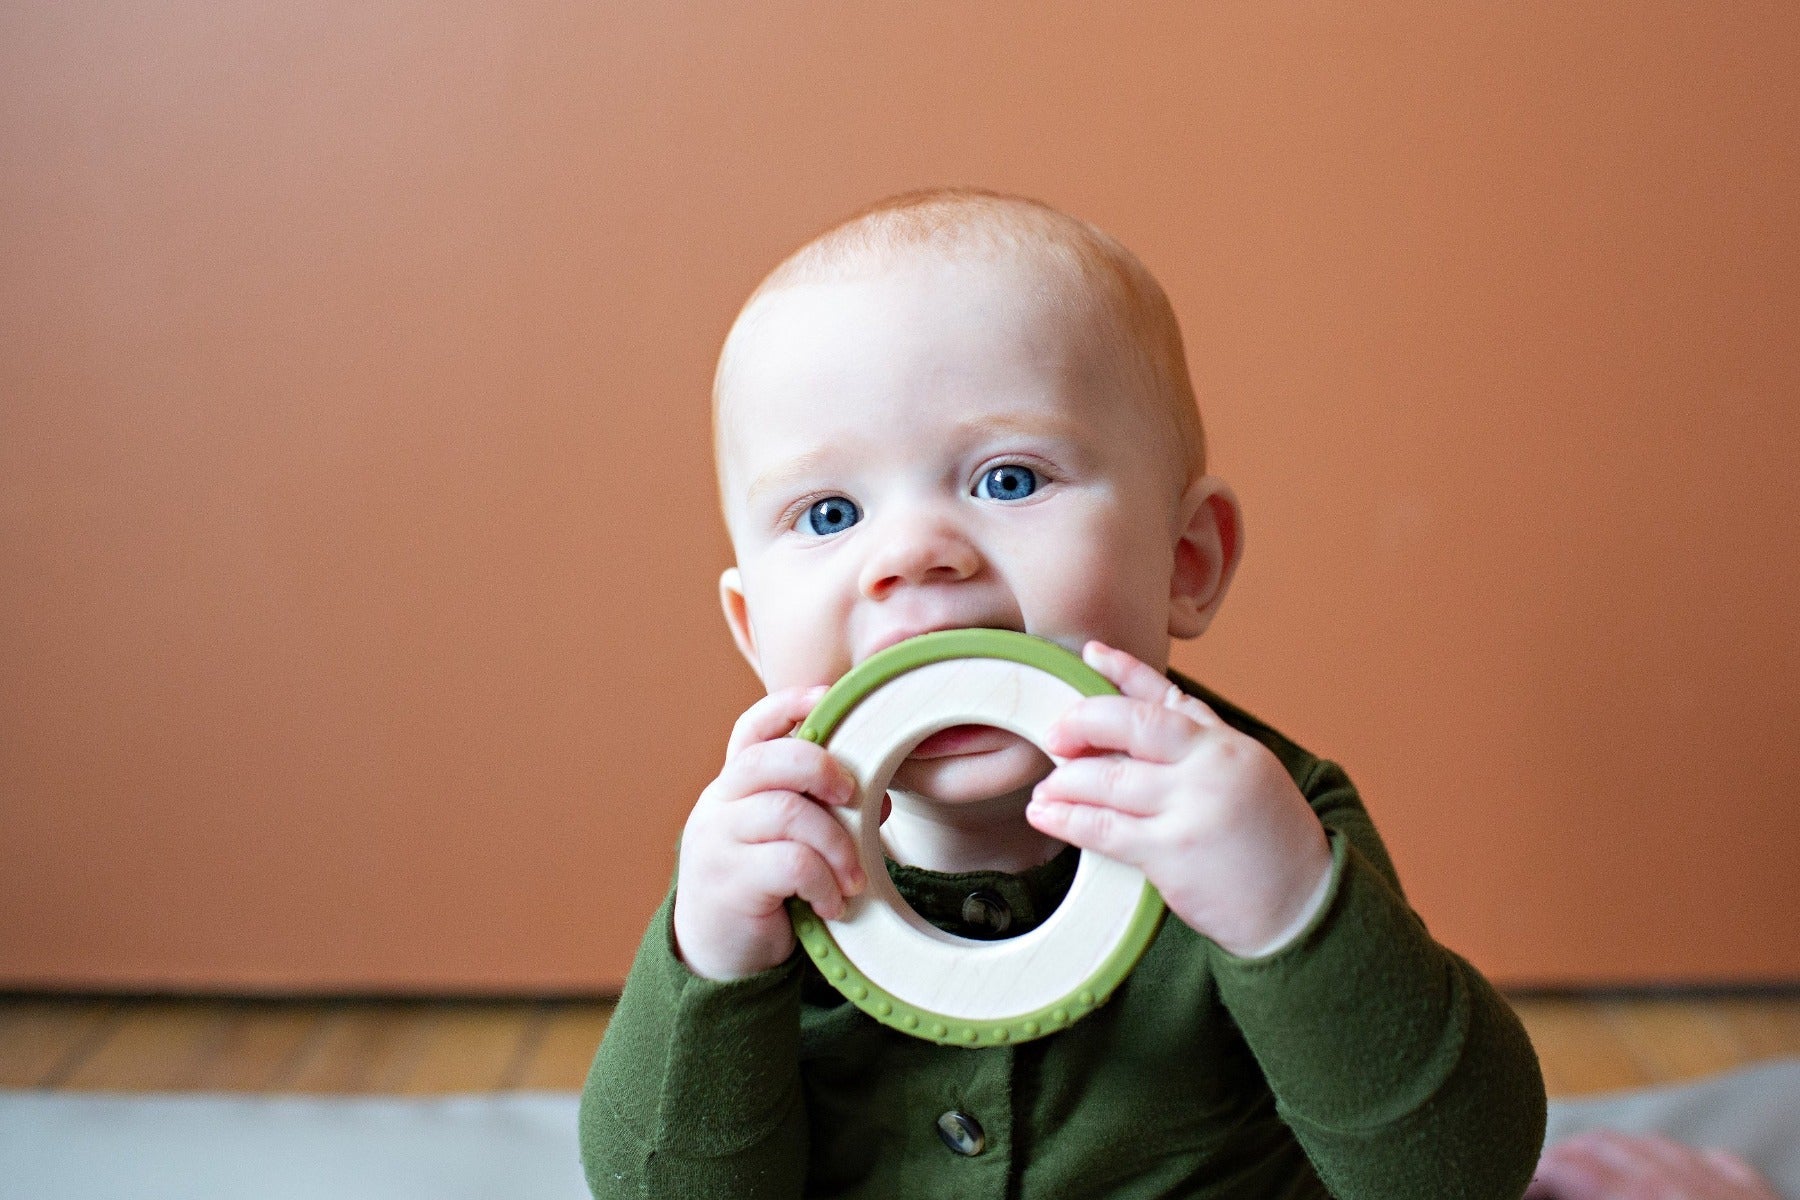 Silicone Wrapped Teether